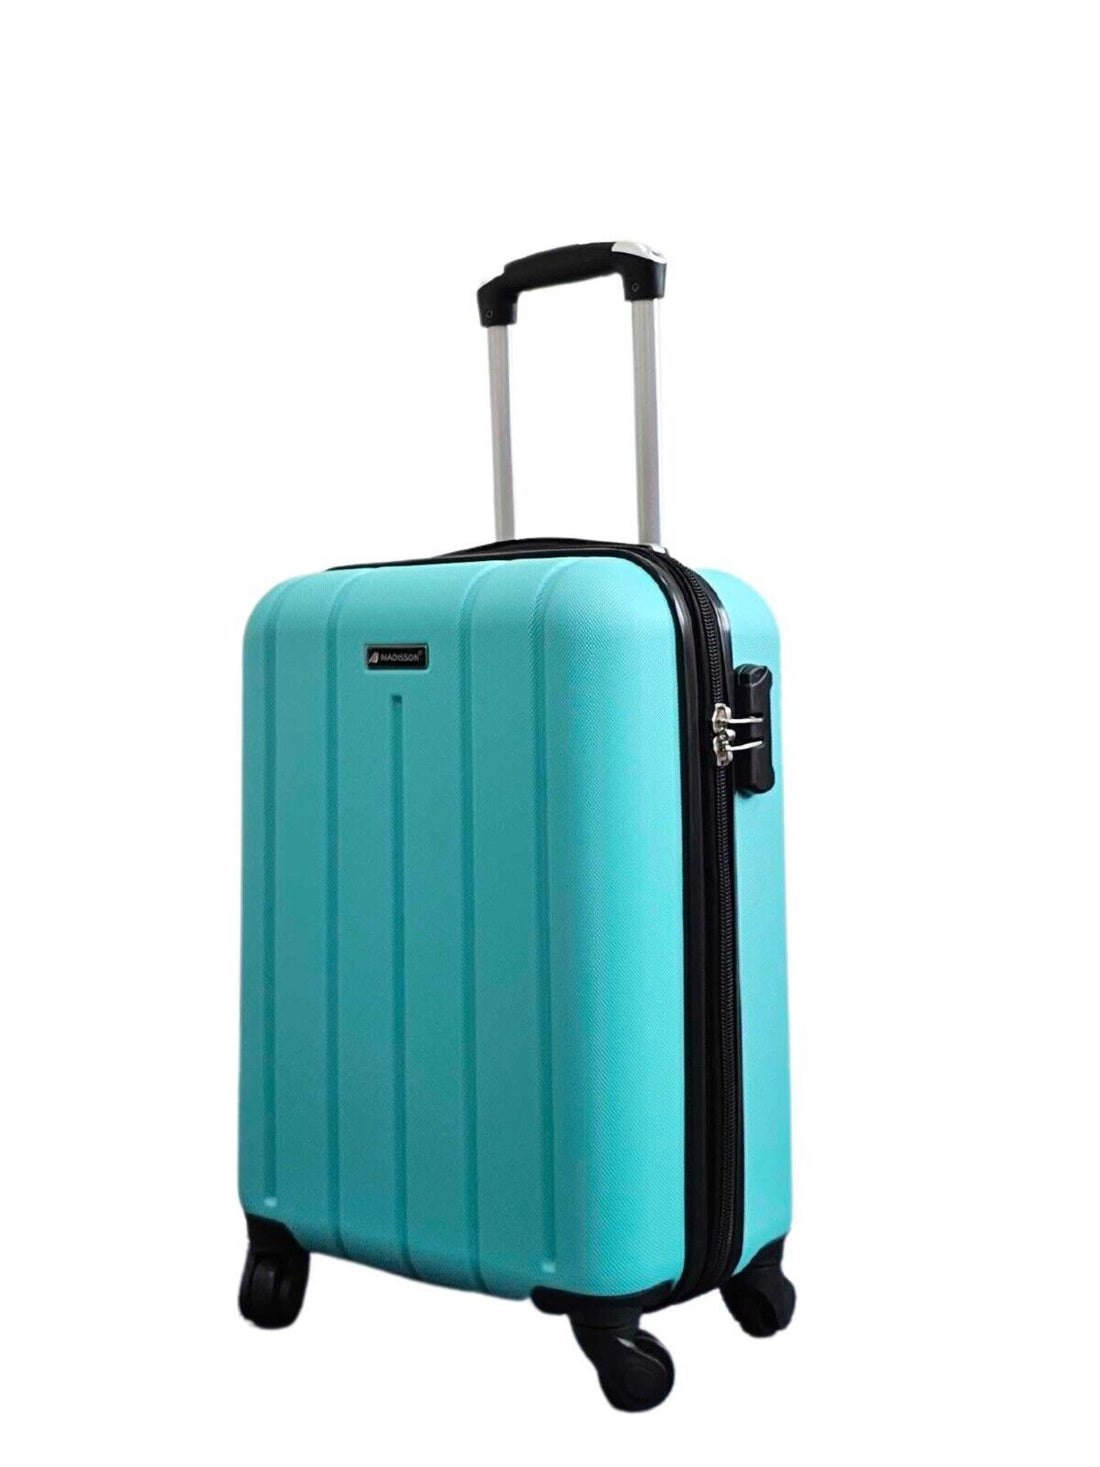 Robust Hard shell Cabin Suitcase 4 Wheel Lightweight Luggage - Upperclass Fashions 